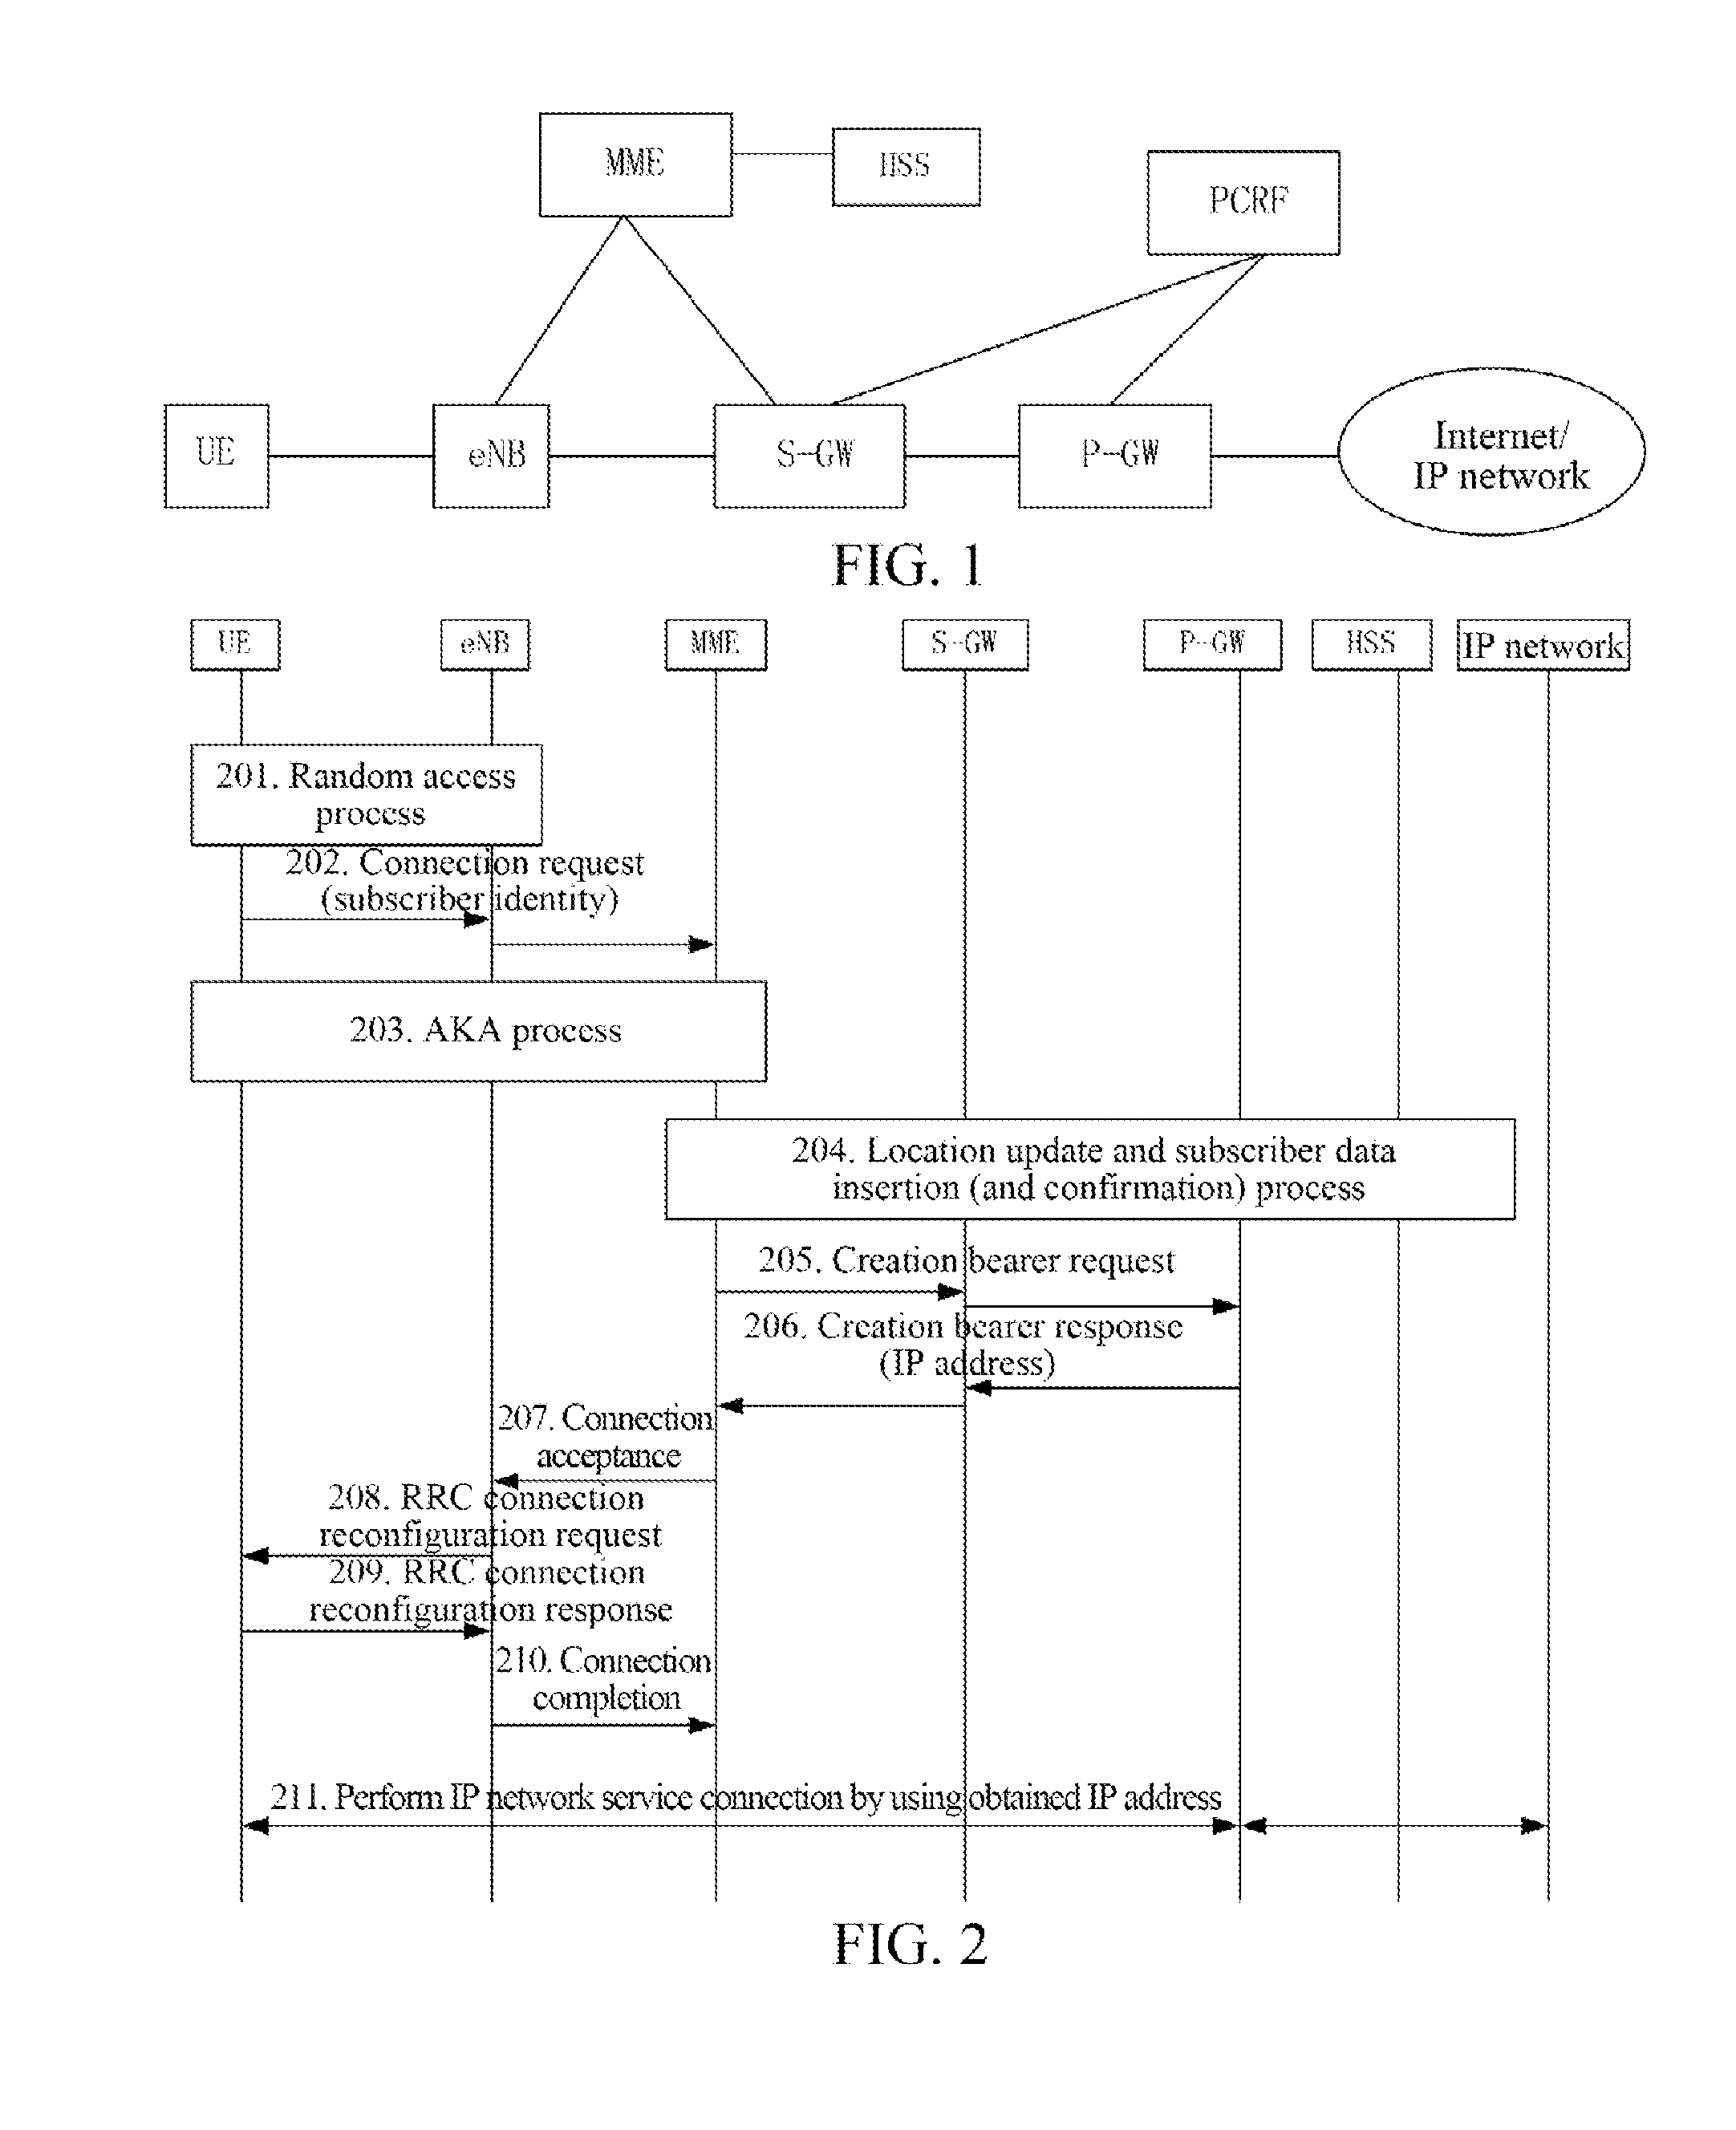 Mobile Network-Based Tenant Network Service Implementation Method, System, and Network Element